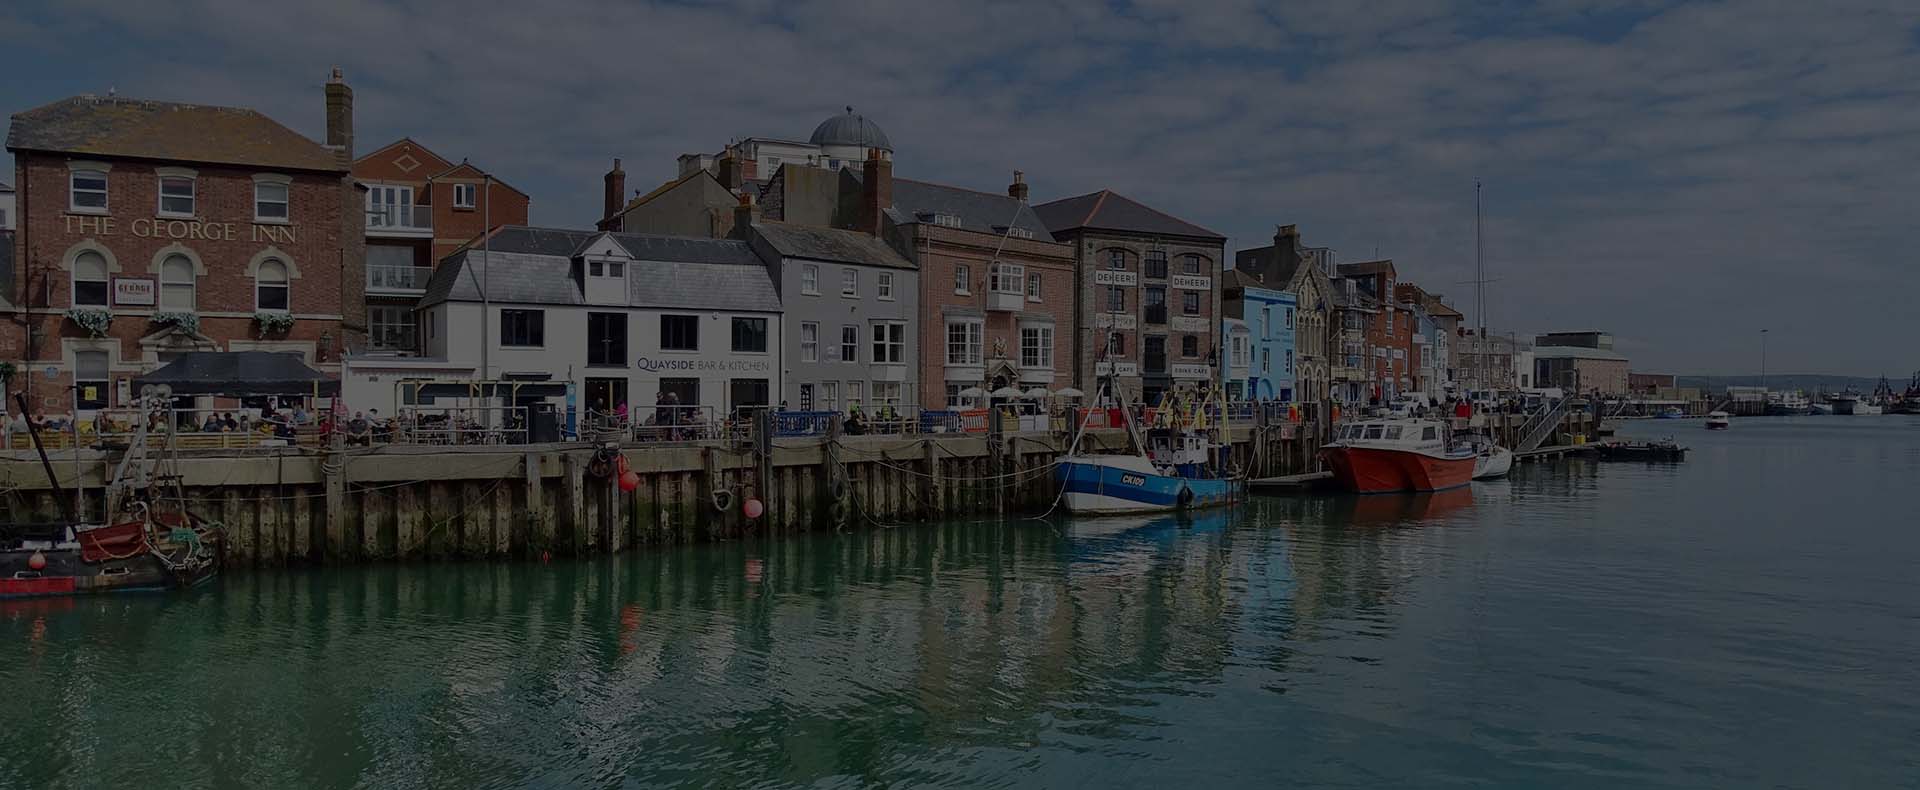 weymouth habroub with buildings on the harbour by the sea with boats